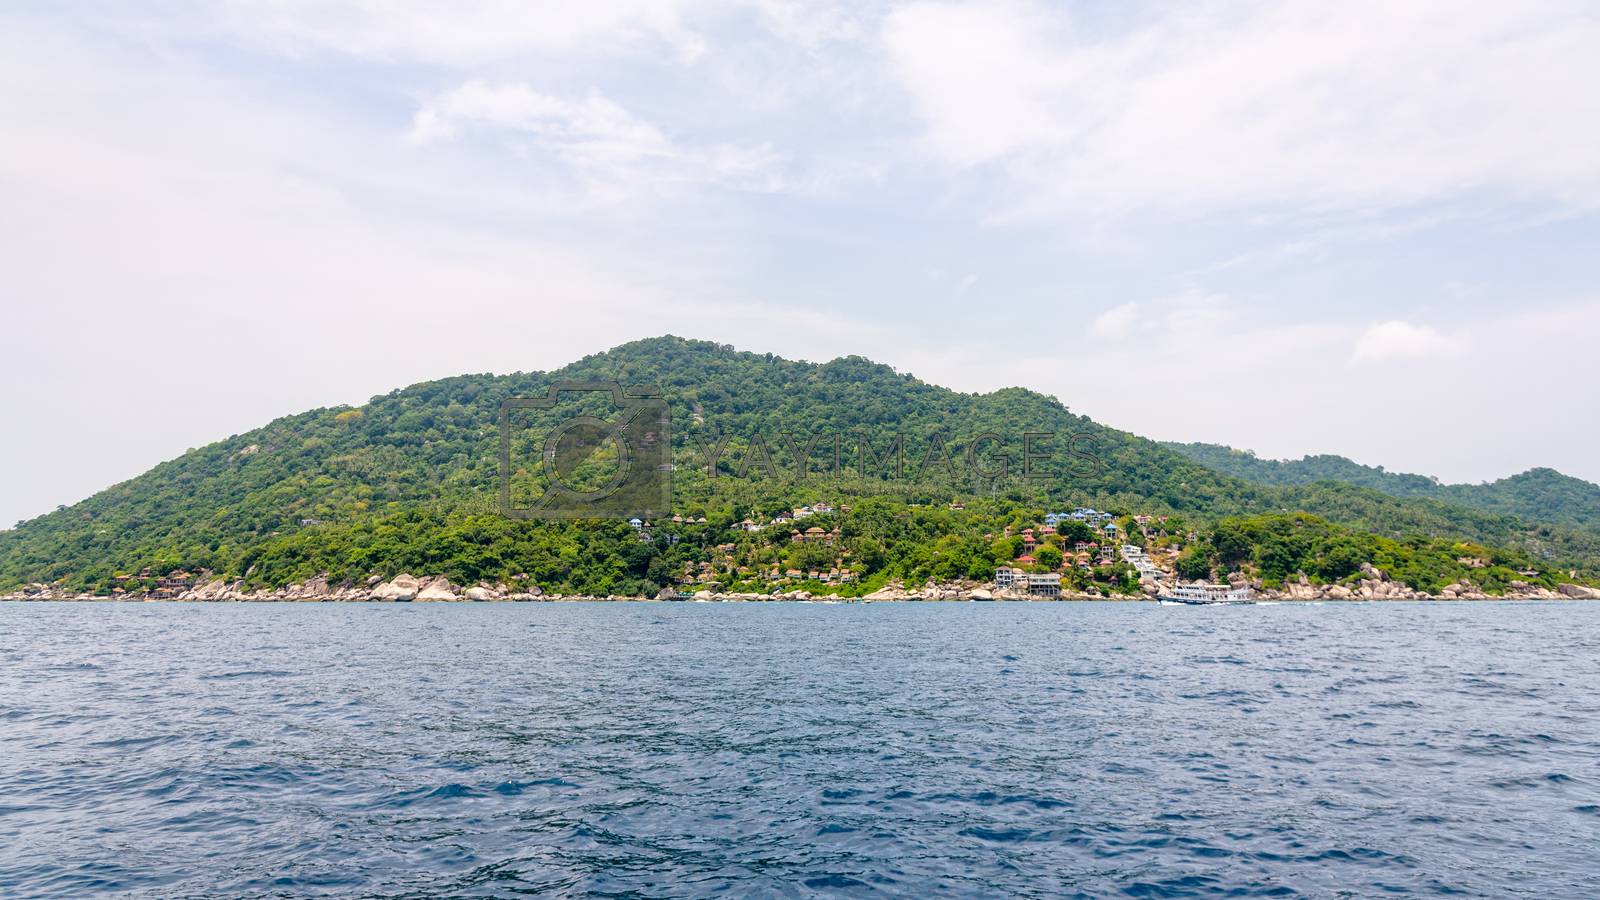 Royalty free image of Koh Tao island in the Gulf of Thailand by Yongkiet